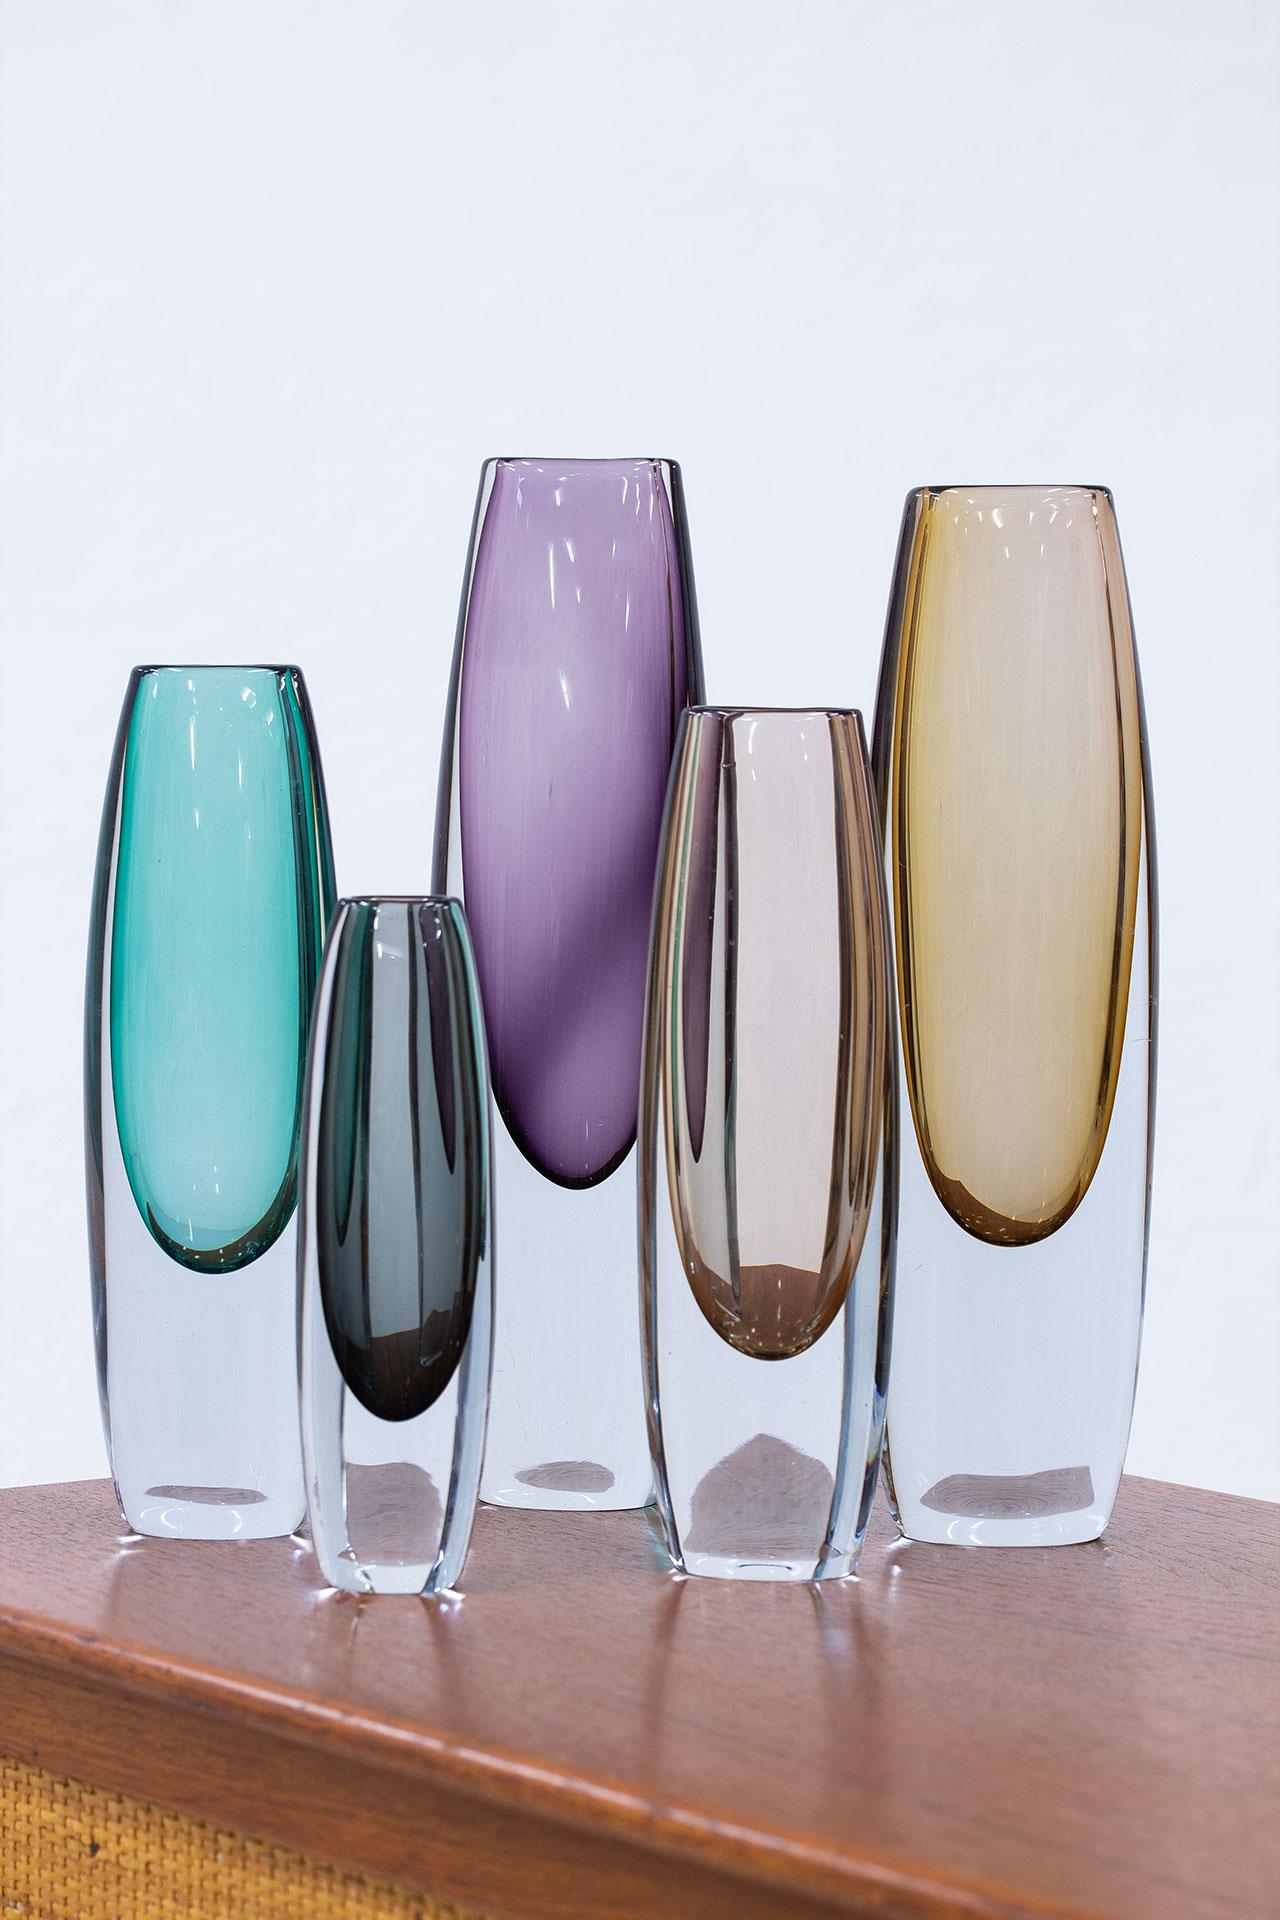 Group of 5 “sommerso” type vases. Designed by Gunnar Nylund and Asta Strömberg. Manufactured by Strömbergshyttan in Sweden during the 1950s. Colored glass cased in clear glass technique. Three of the vases are signed (engraved on the bottom).
The